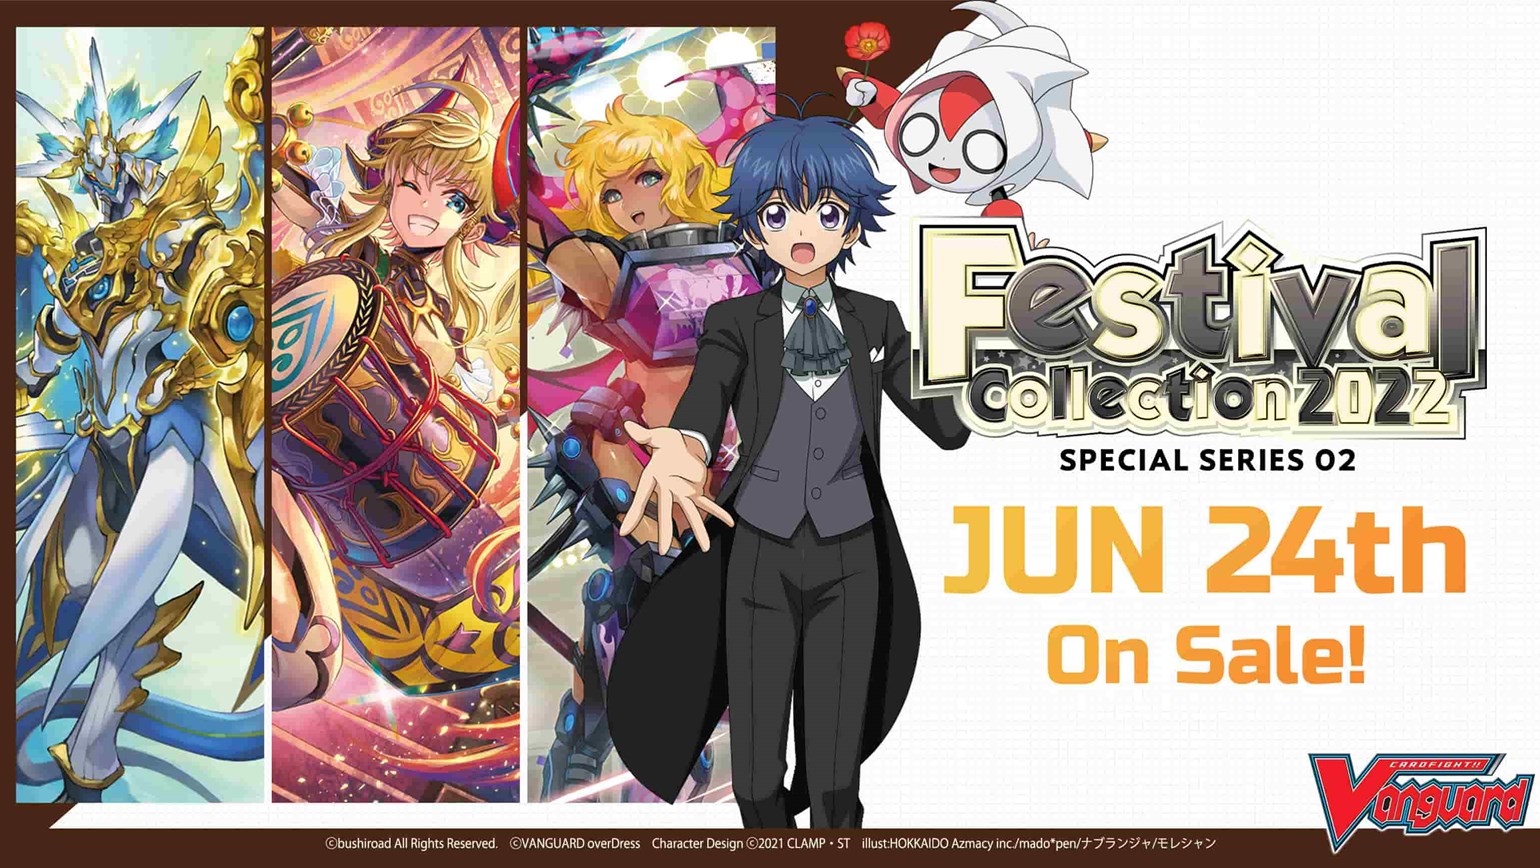 Team Blackout or Team Daybreak? Take your pick! Cardfight!! Vanguard Special Series 02: Festival Collection 2022, coming to stores on June 24th!